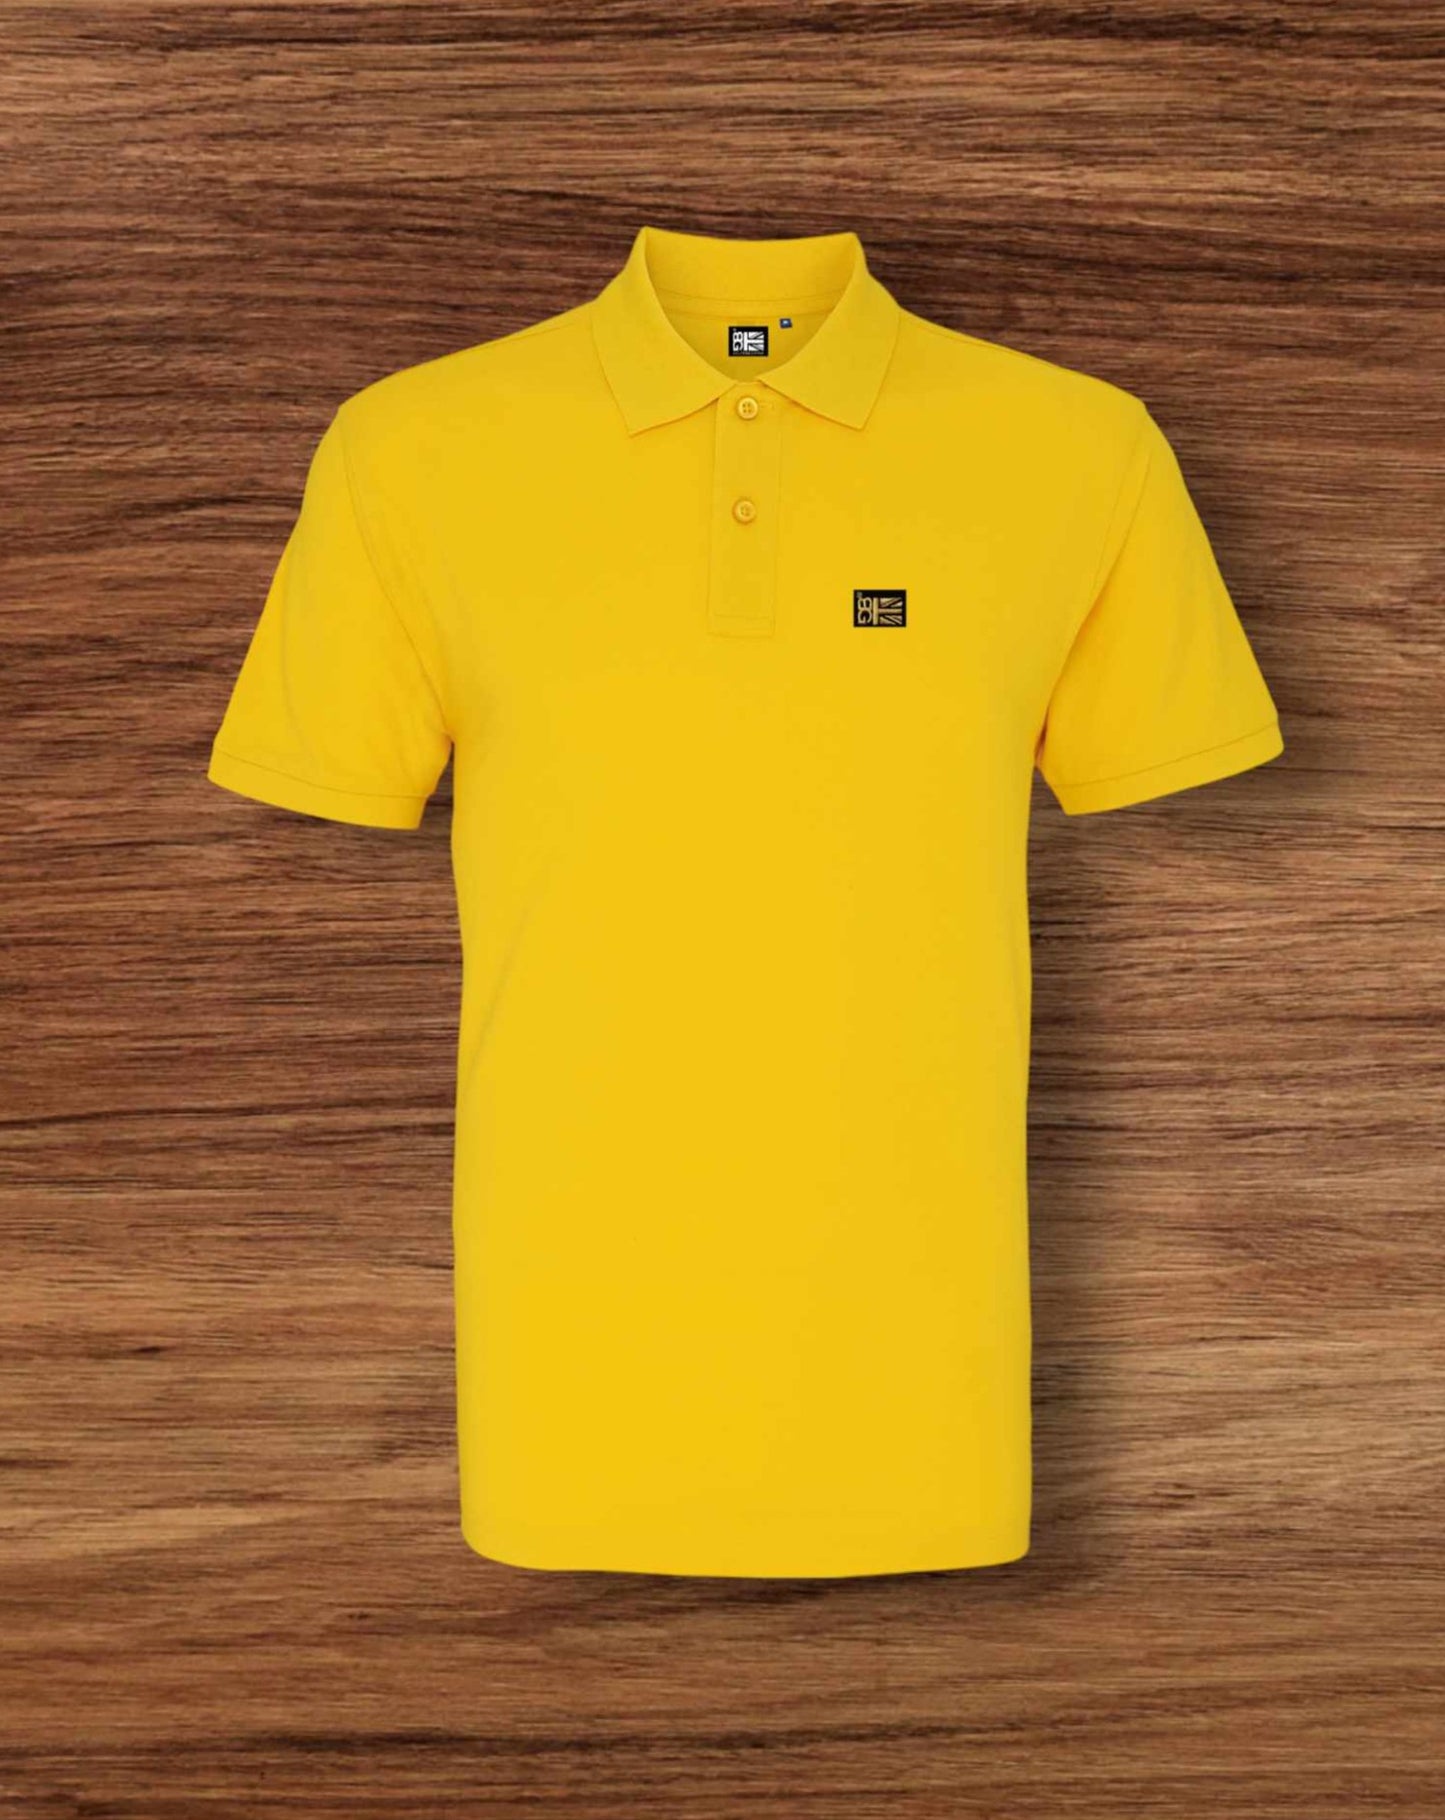 The Great British Polo - Men's